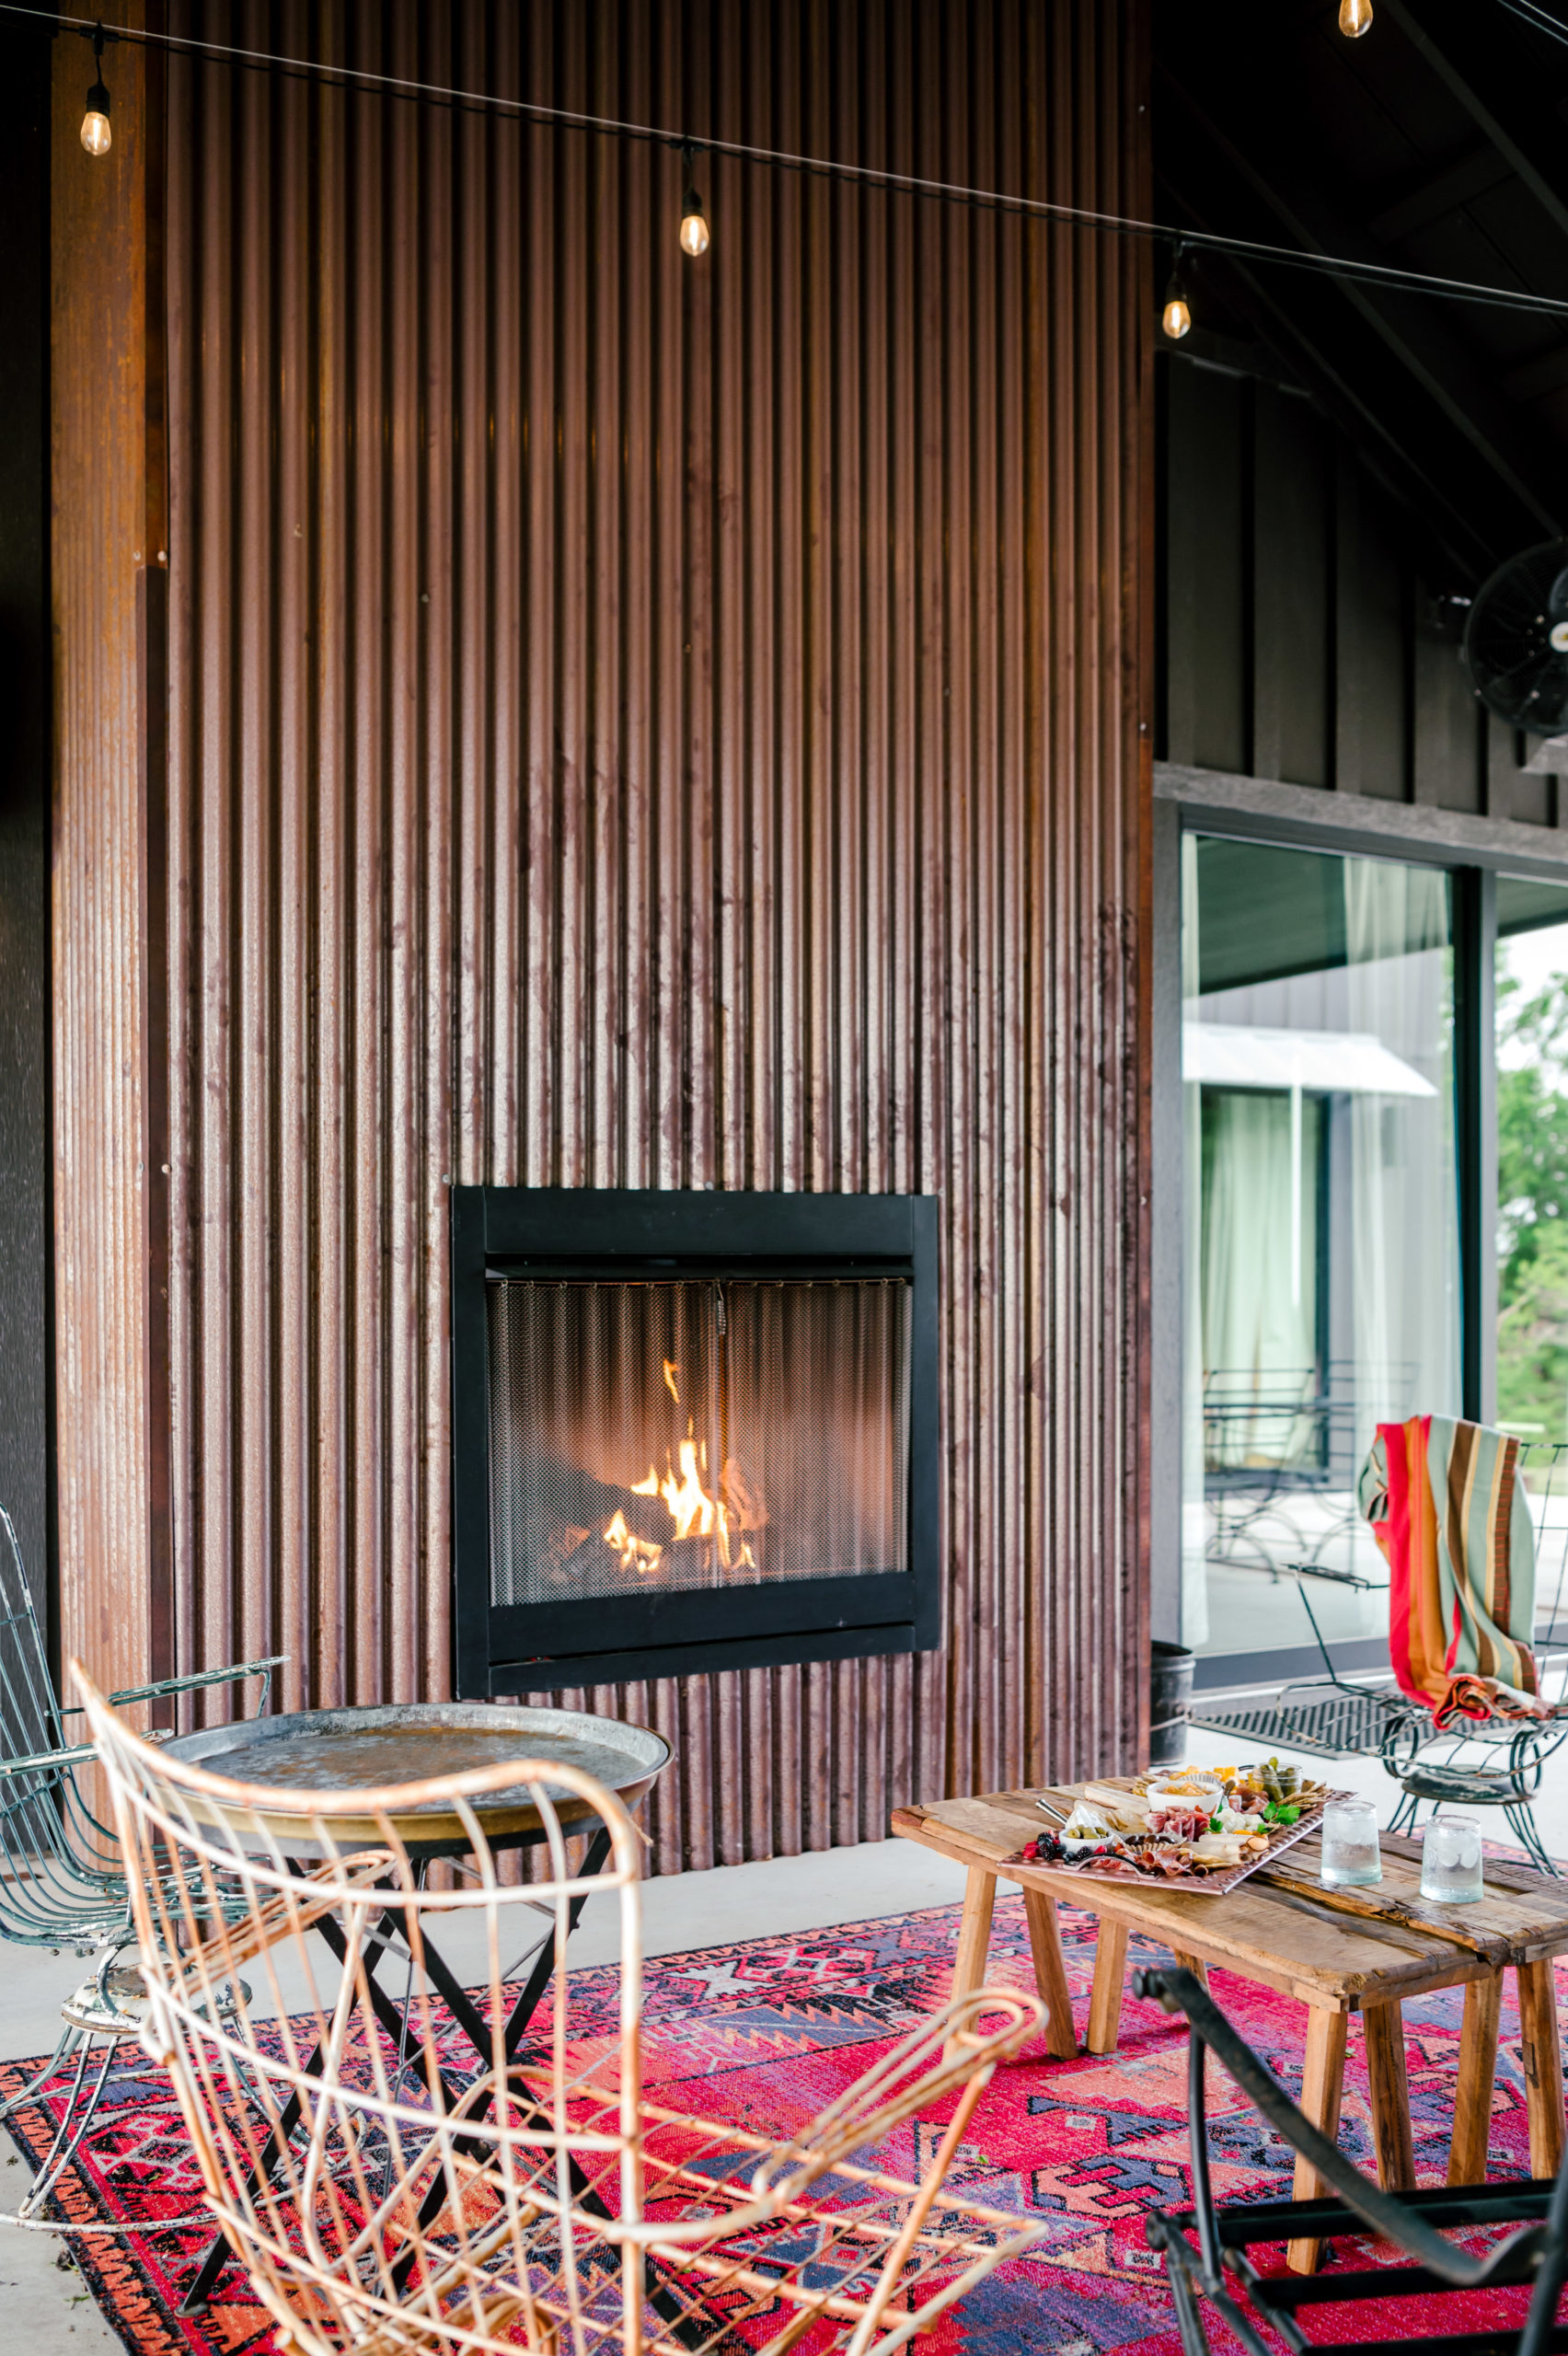 Outside fireplace with exterior lounge furniture and red western rug